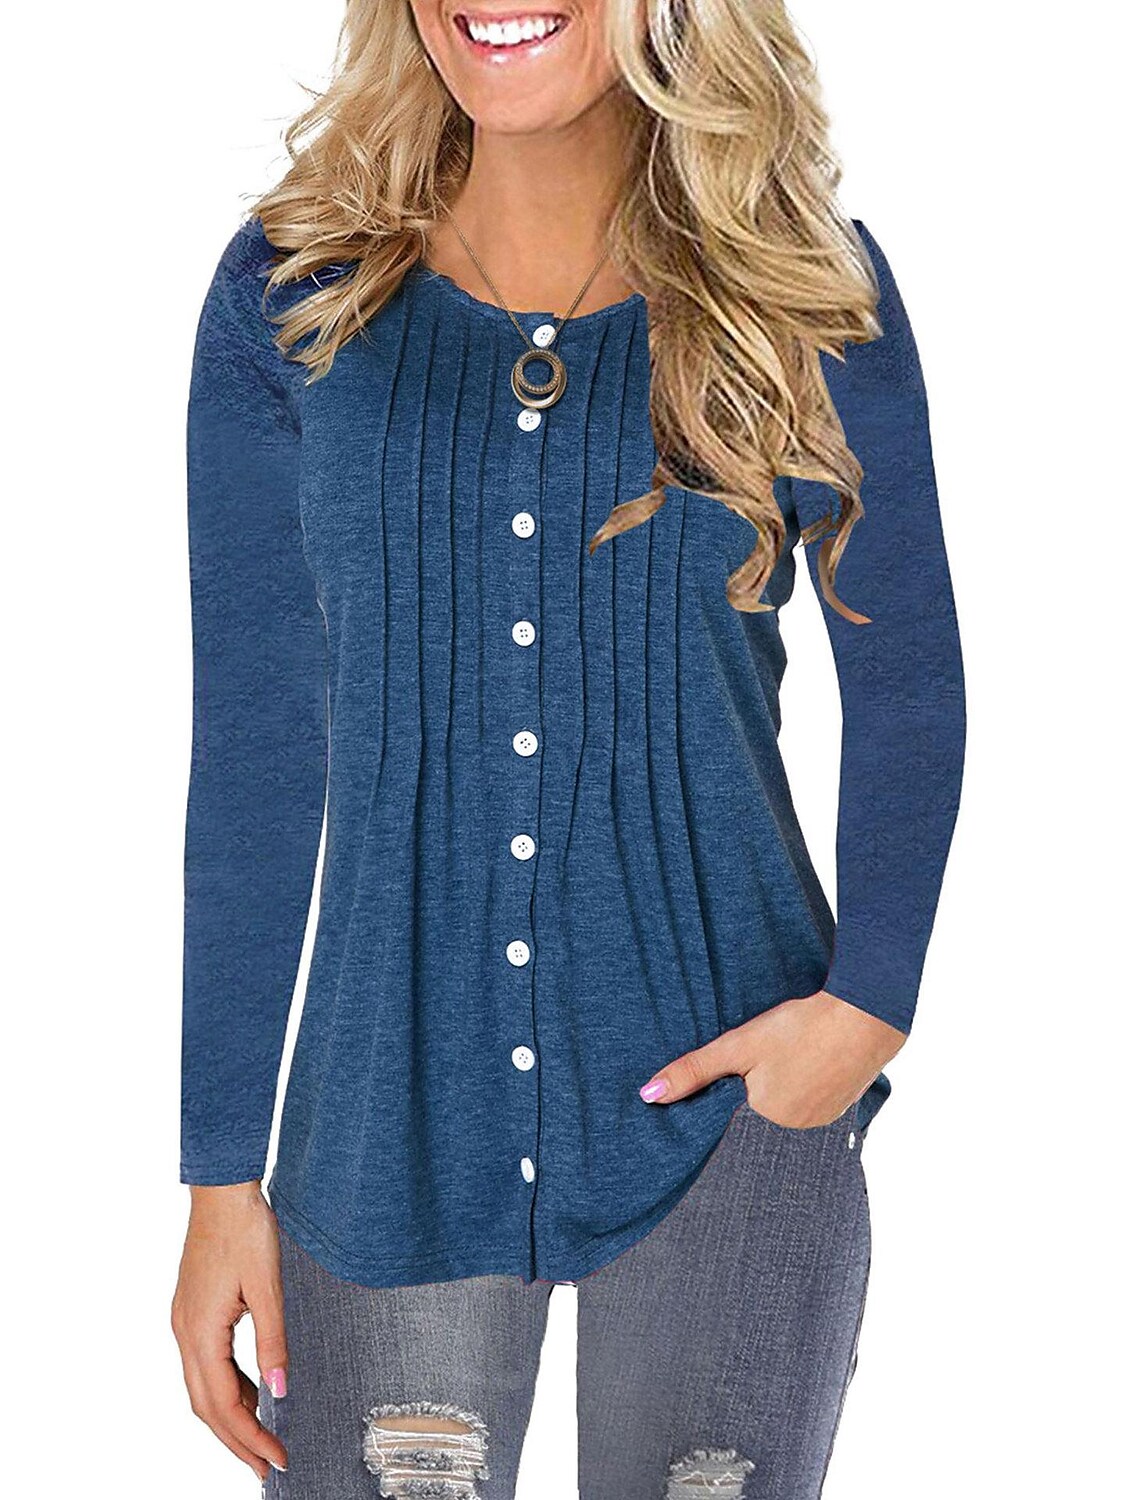 Women's round neck solid color casual button long sleeve top